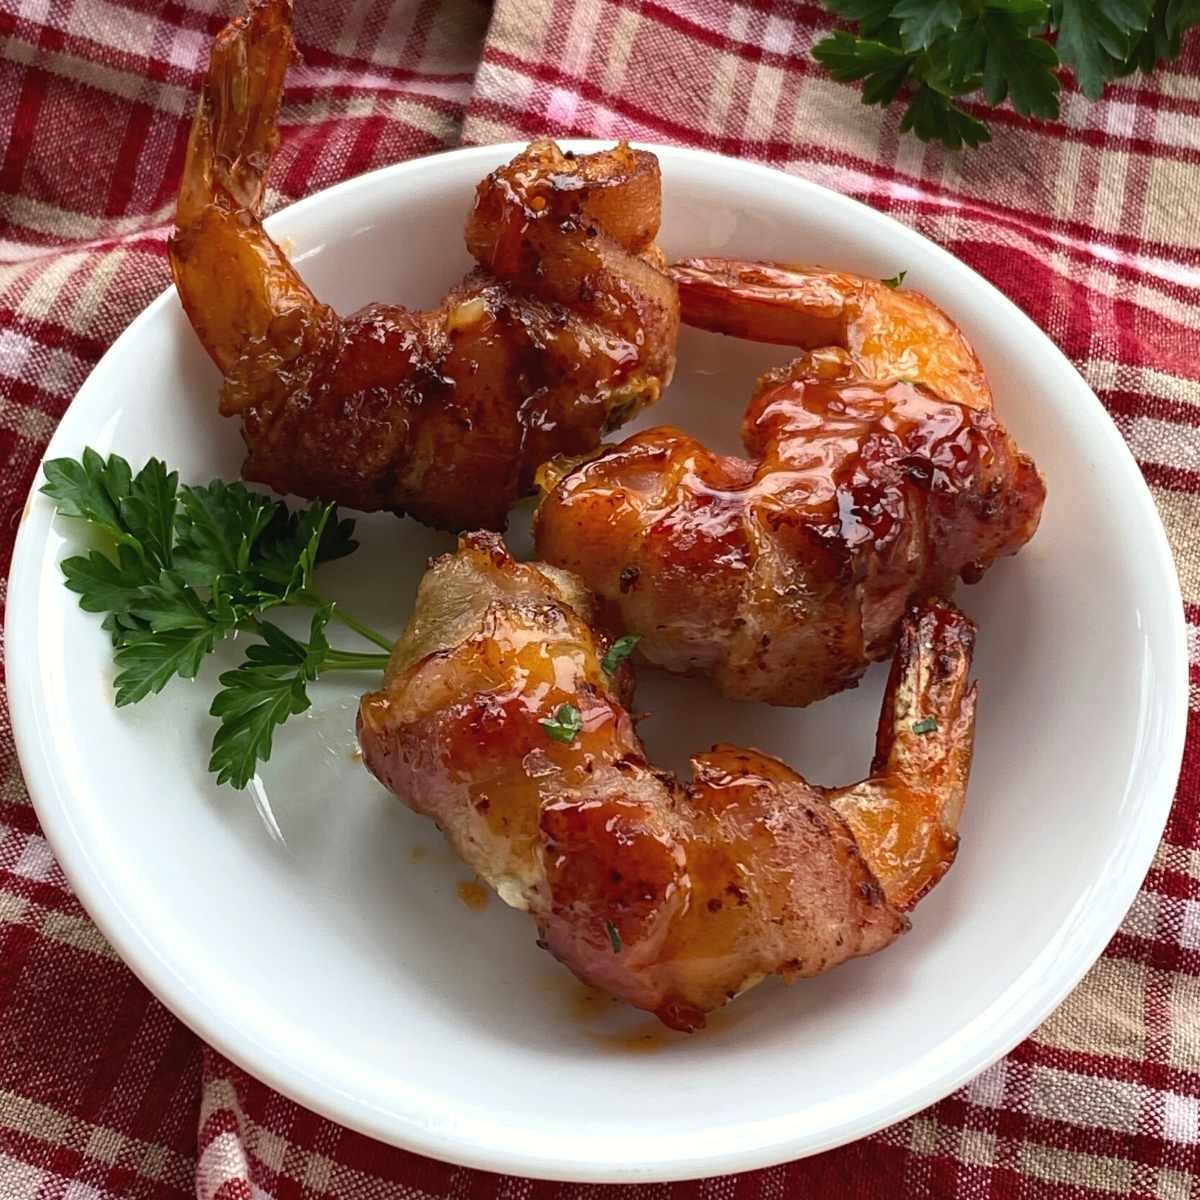 Three bacon wrapped shrimp stuffed with cream cheese and a jalapeno slice on a plate.